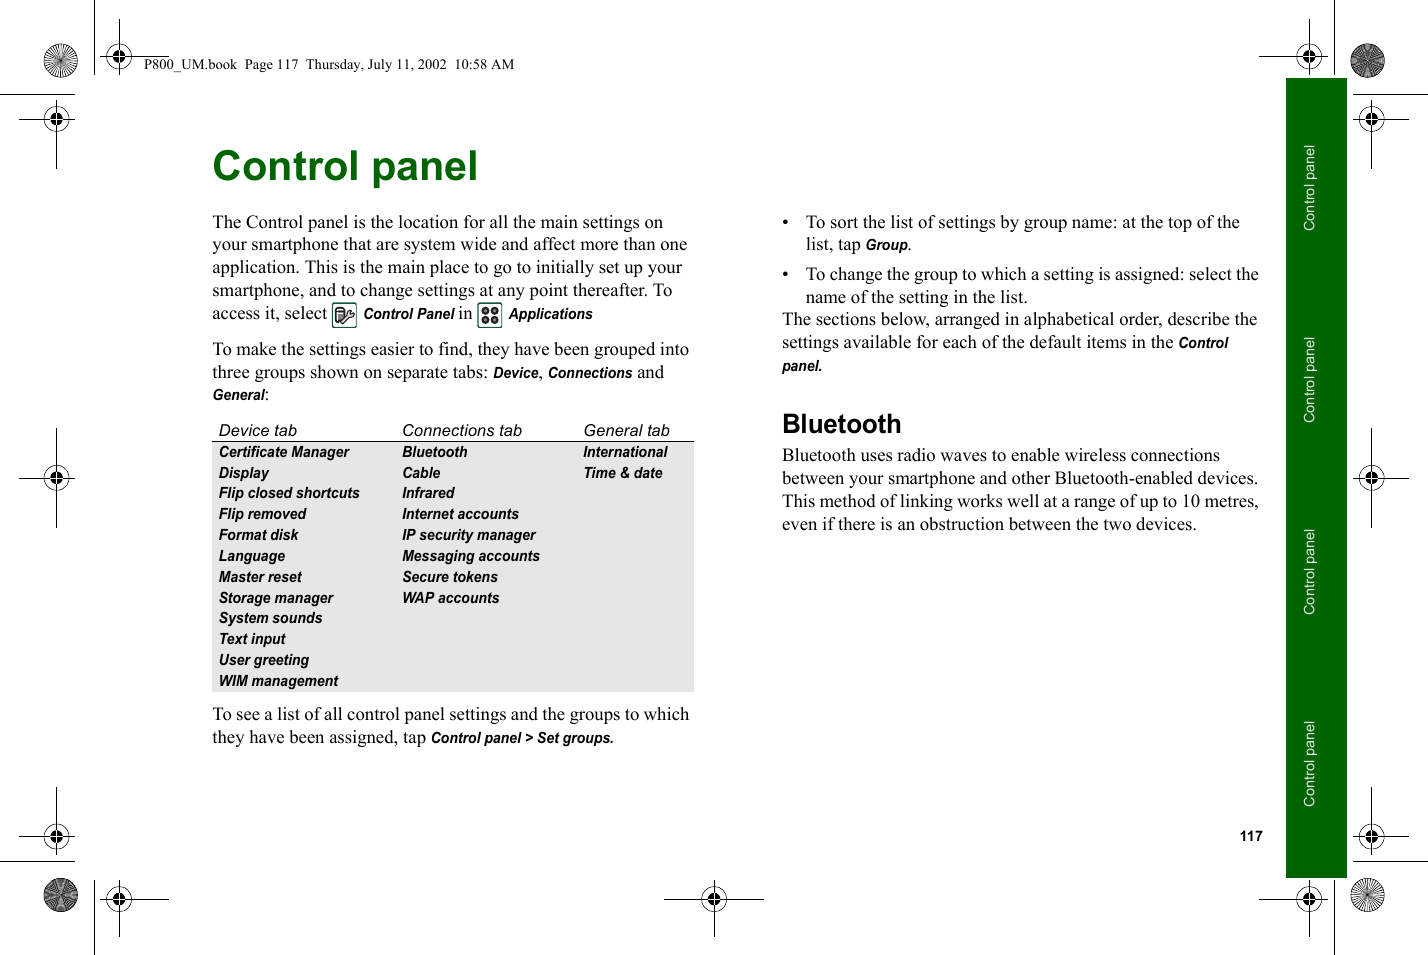 117Control panelControl panelControl panelControl panelControl panel The Control panel is the location for all the main settings on your smartphone that are system wide and affect more than one application. This is the main place to go to initially set up your smartphone, and to change settings at any point thereafter. To access it, select Control Panel in ApplicationsTo make the settings easier to find, they have been grouped into three groups shown on separate tabs: Device, Connections and General:To see a list of all control panel settings and the groups to which they have been assigned, tap Control panel &gt; Set groups.• To sort the list of settings by group name: at the top of the list, tap Group.• To change the group to which a setting is assigned: select the name of the setting in the list.The sections below, arranged in alphabetical order, describe the settings available for each of the default items in the Control panel. BluetoothBluetooth uses radio waves to enable wireless connections between your smartphone and other Bluetooth-enabled devices. This method of linking works well at a range of up to 10 metres, even if there is an obstruction between the two devices.Device tab Connections tab General tabCertificate Manager Bluetooth InternationalDisplay Cable Time &amp; dateFlip closed shortcuts InfraredFlip removed Internet accountsFormat disk IP security managerLanguage Messaging accountsMaster reset Secure tokensStorage manager WAP accountsSystem soundsText inputUser greetingWIM managementP800_UM.book  Page 117  Thursday, July 11, 2002  10:58 AM